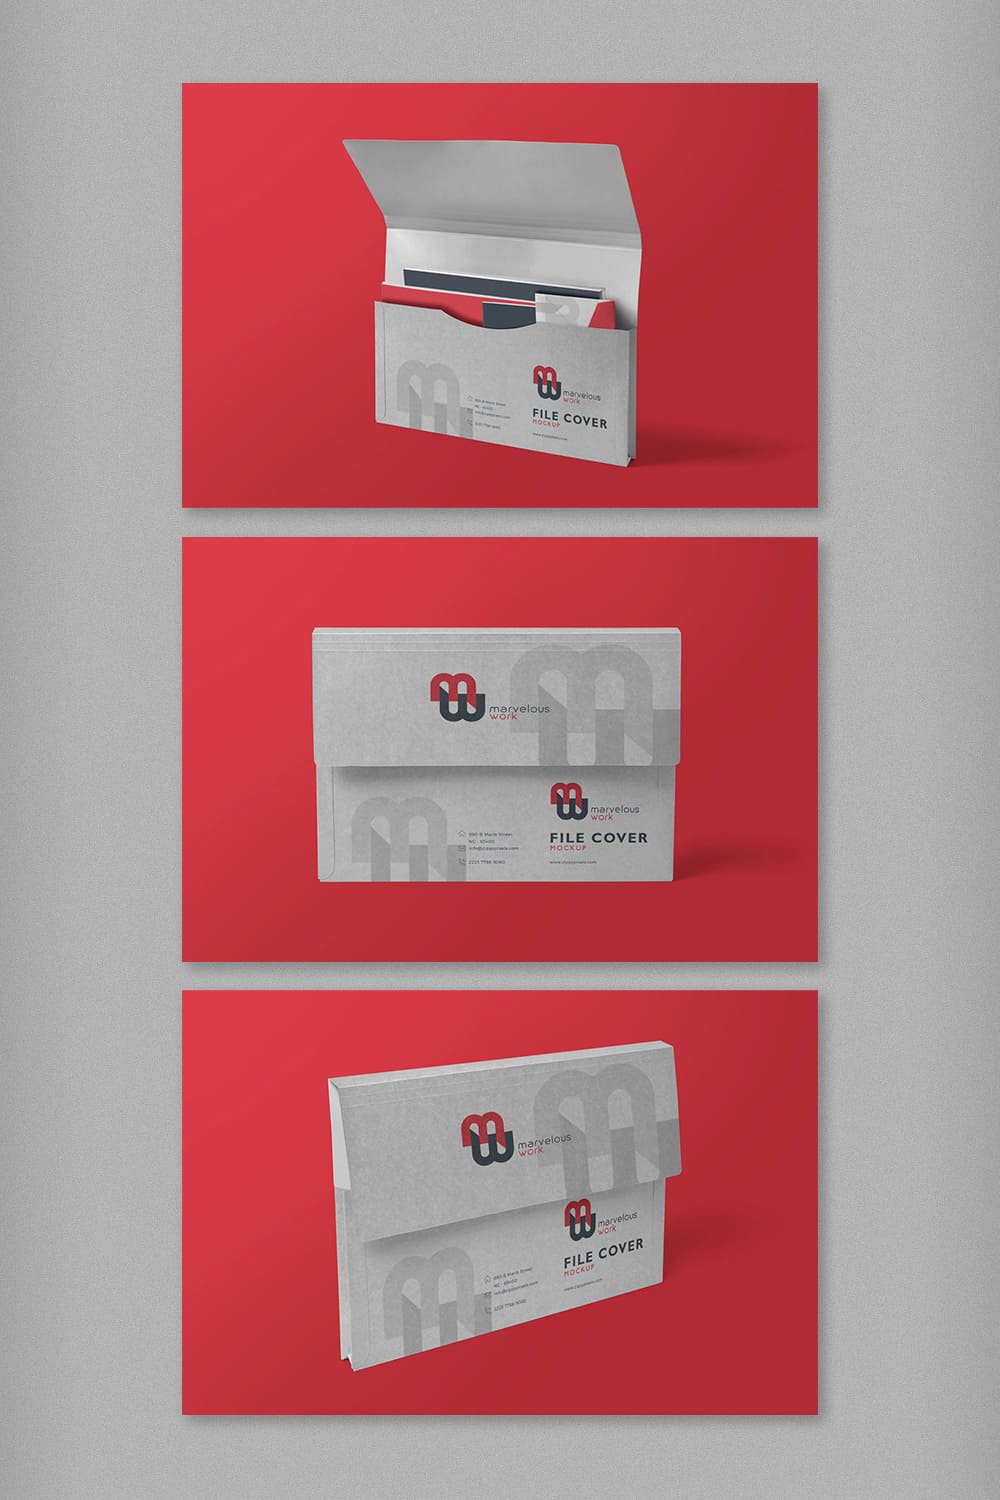 A set of images of flap folder with a lovely design on a red background.